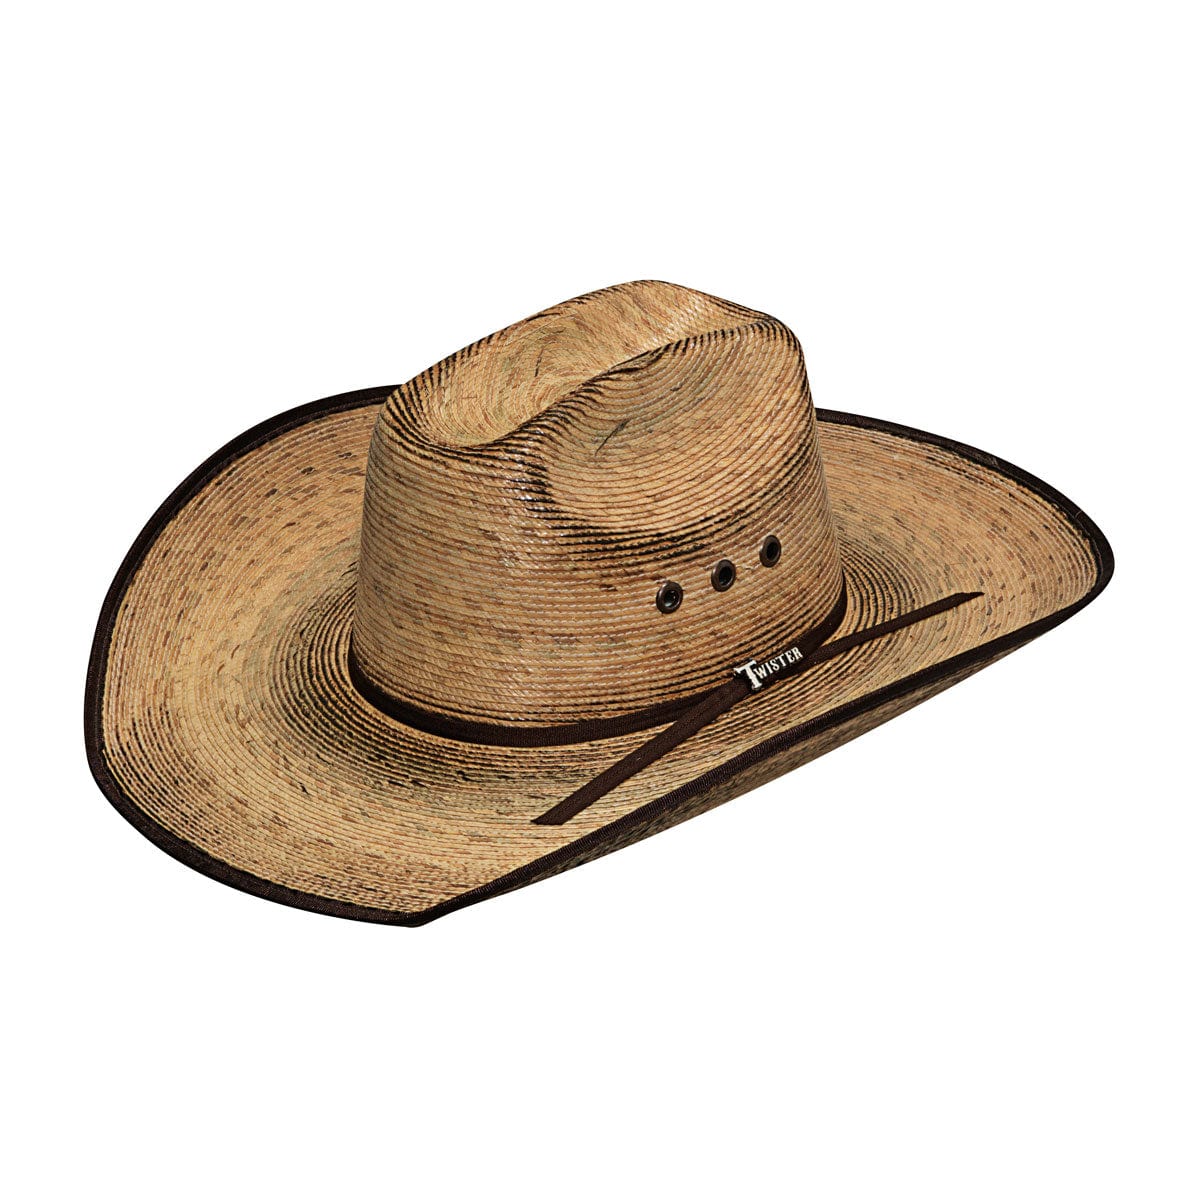 Twister T65208-7.375 4.25 in. Eyelets Fired Palm Hat - Size 7.375